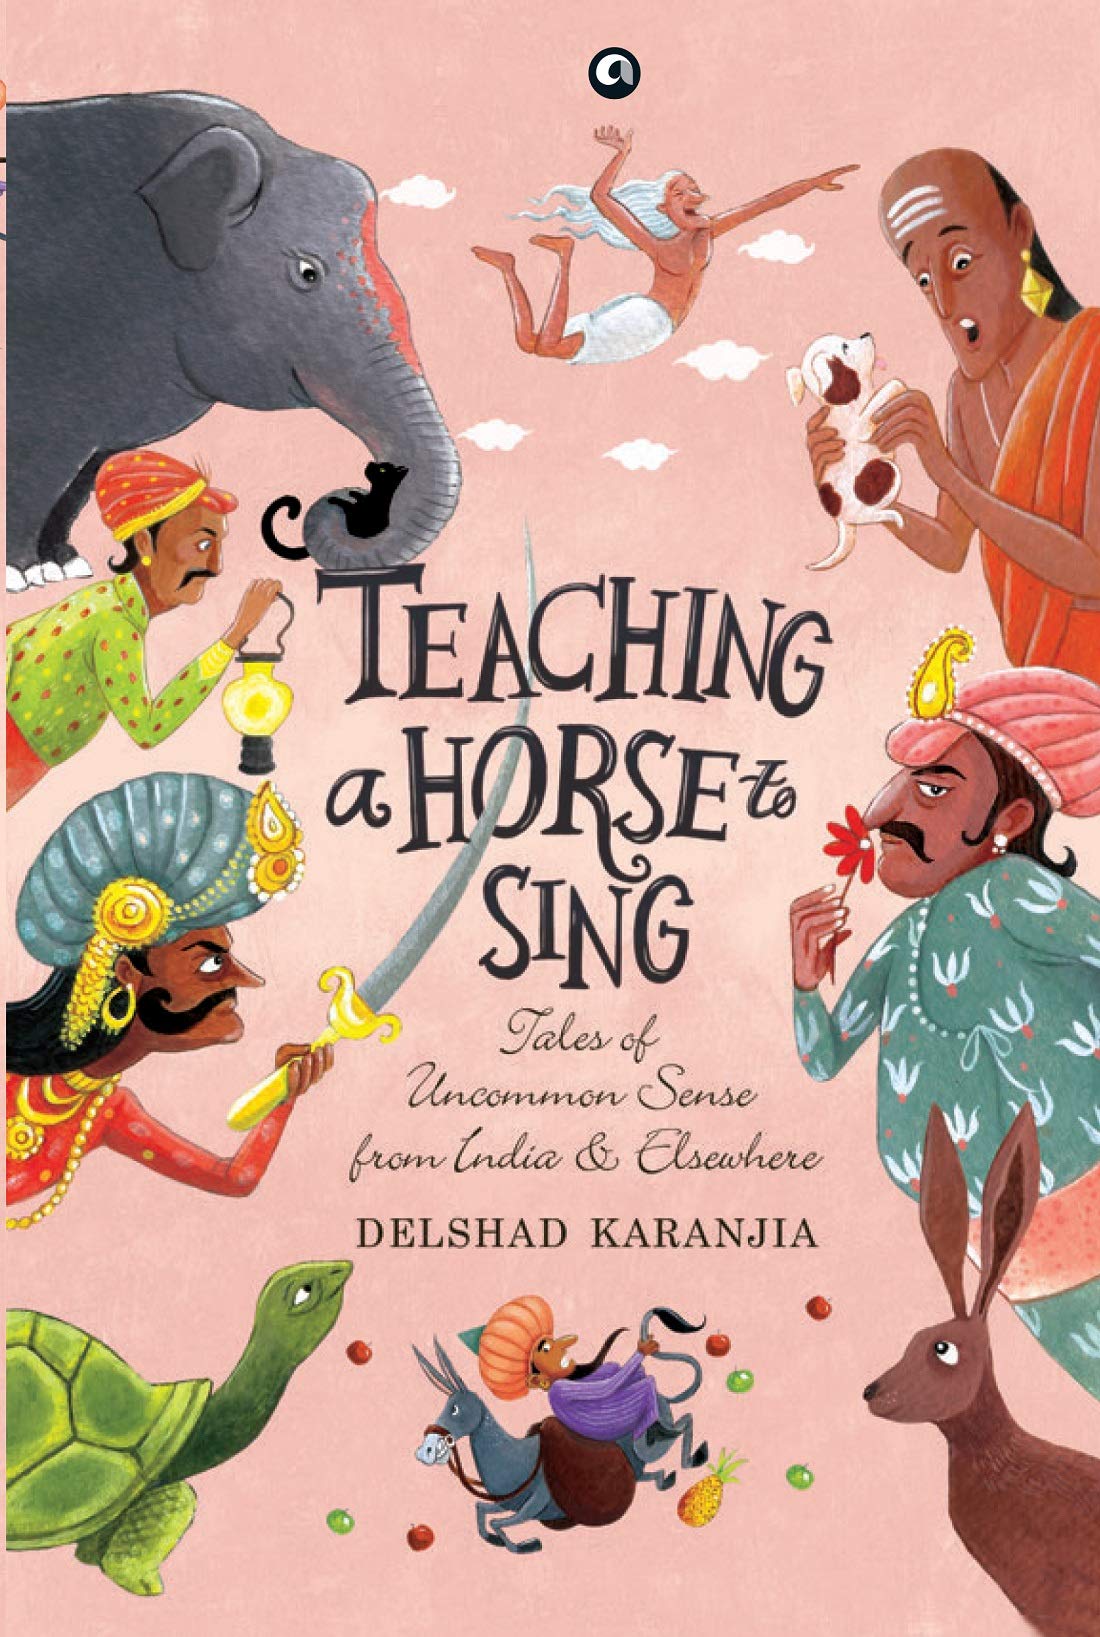 TEACHING A HORSE TO SING